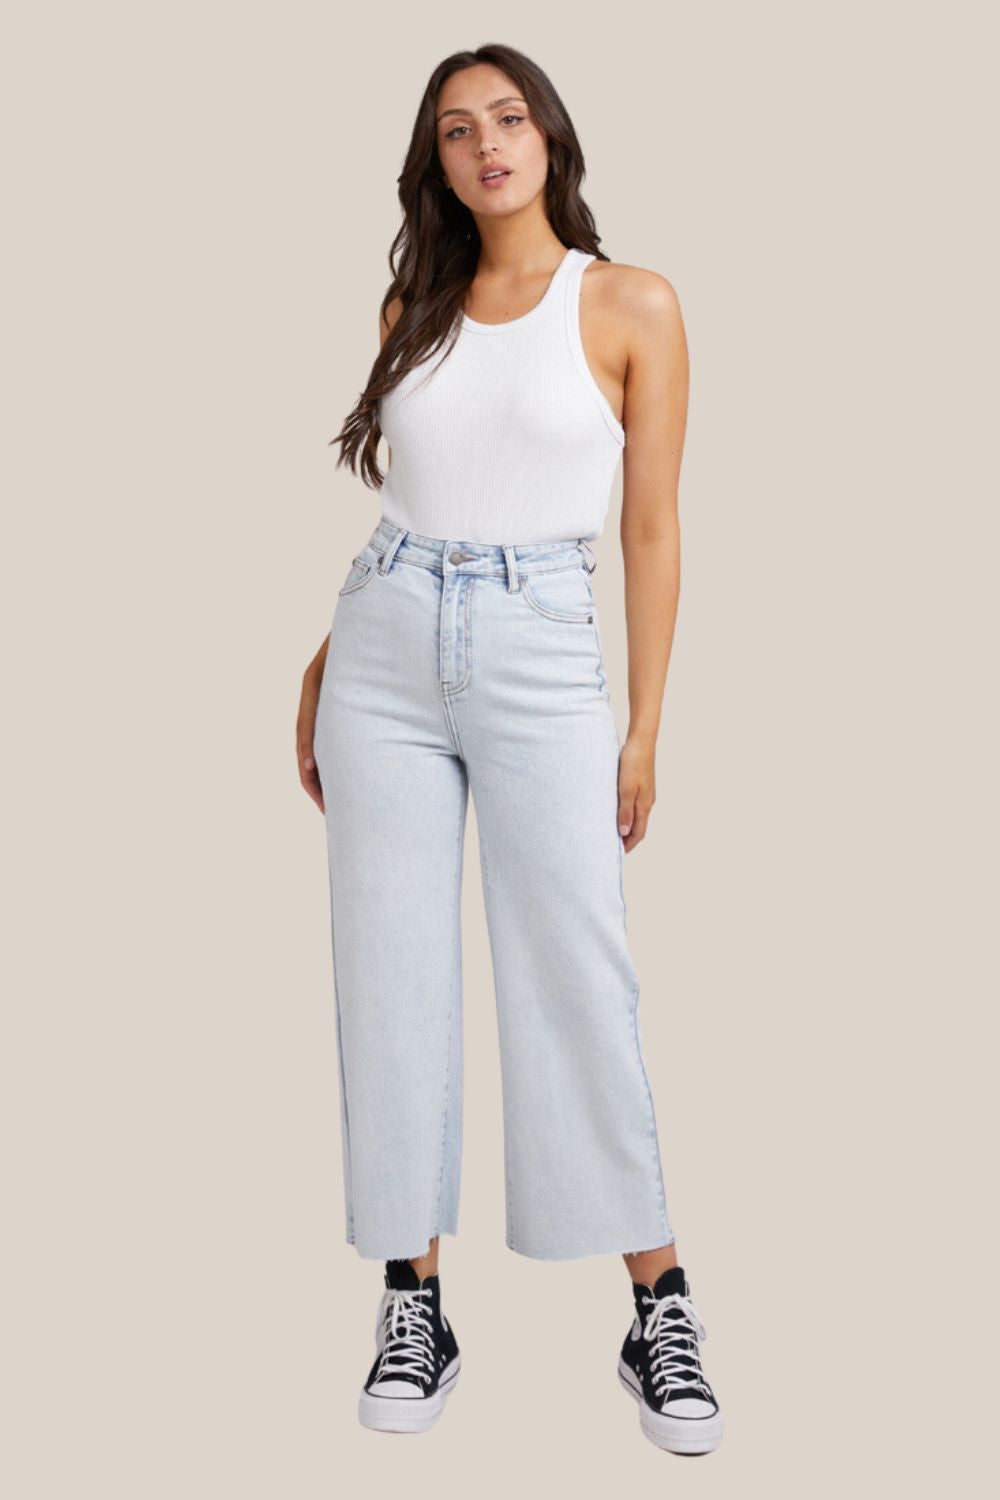 All About Eve Charlie High Rise Wide Leg Jean